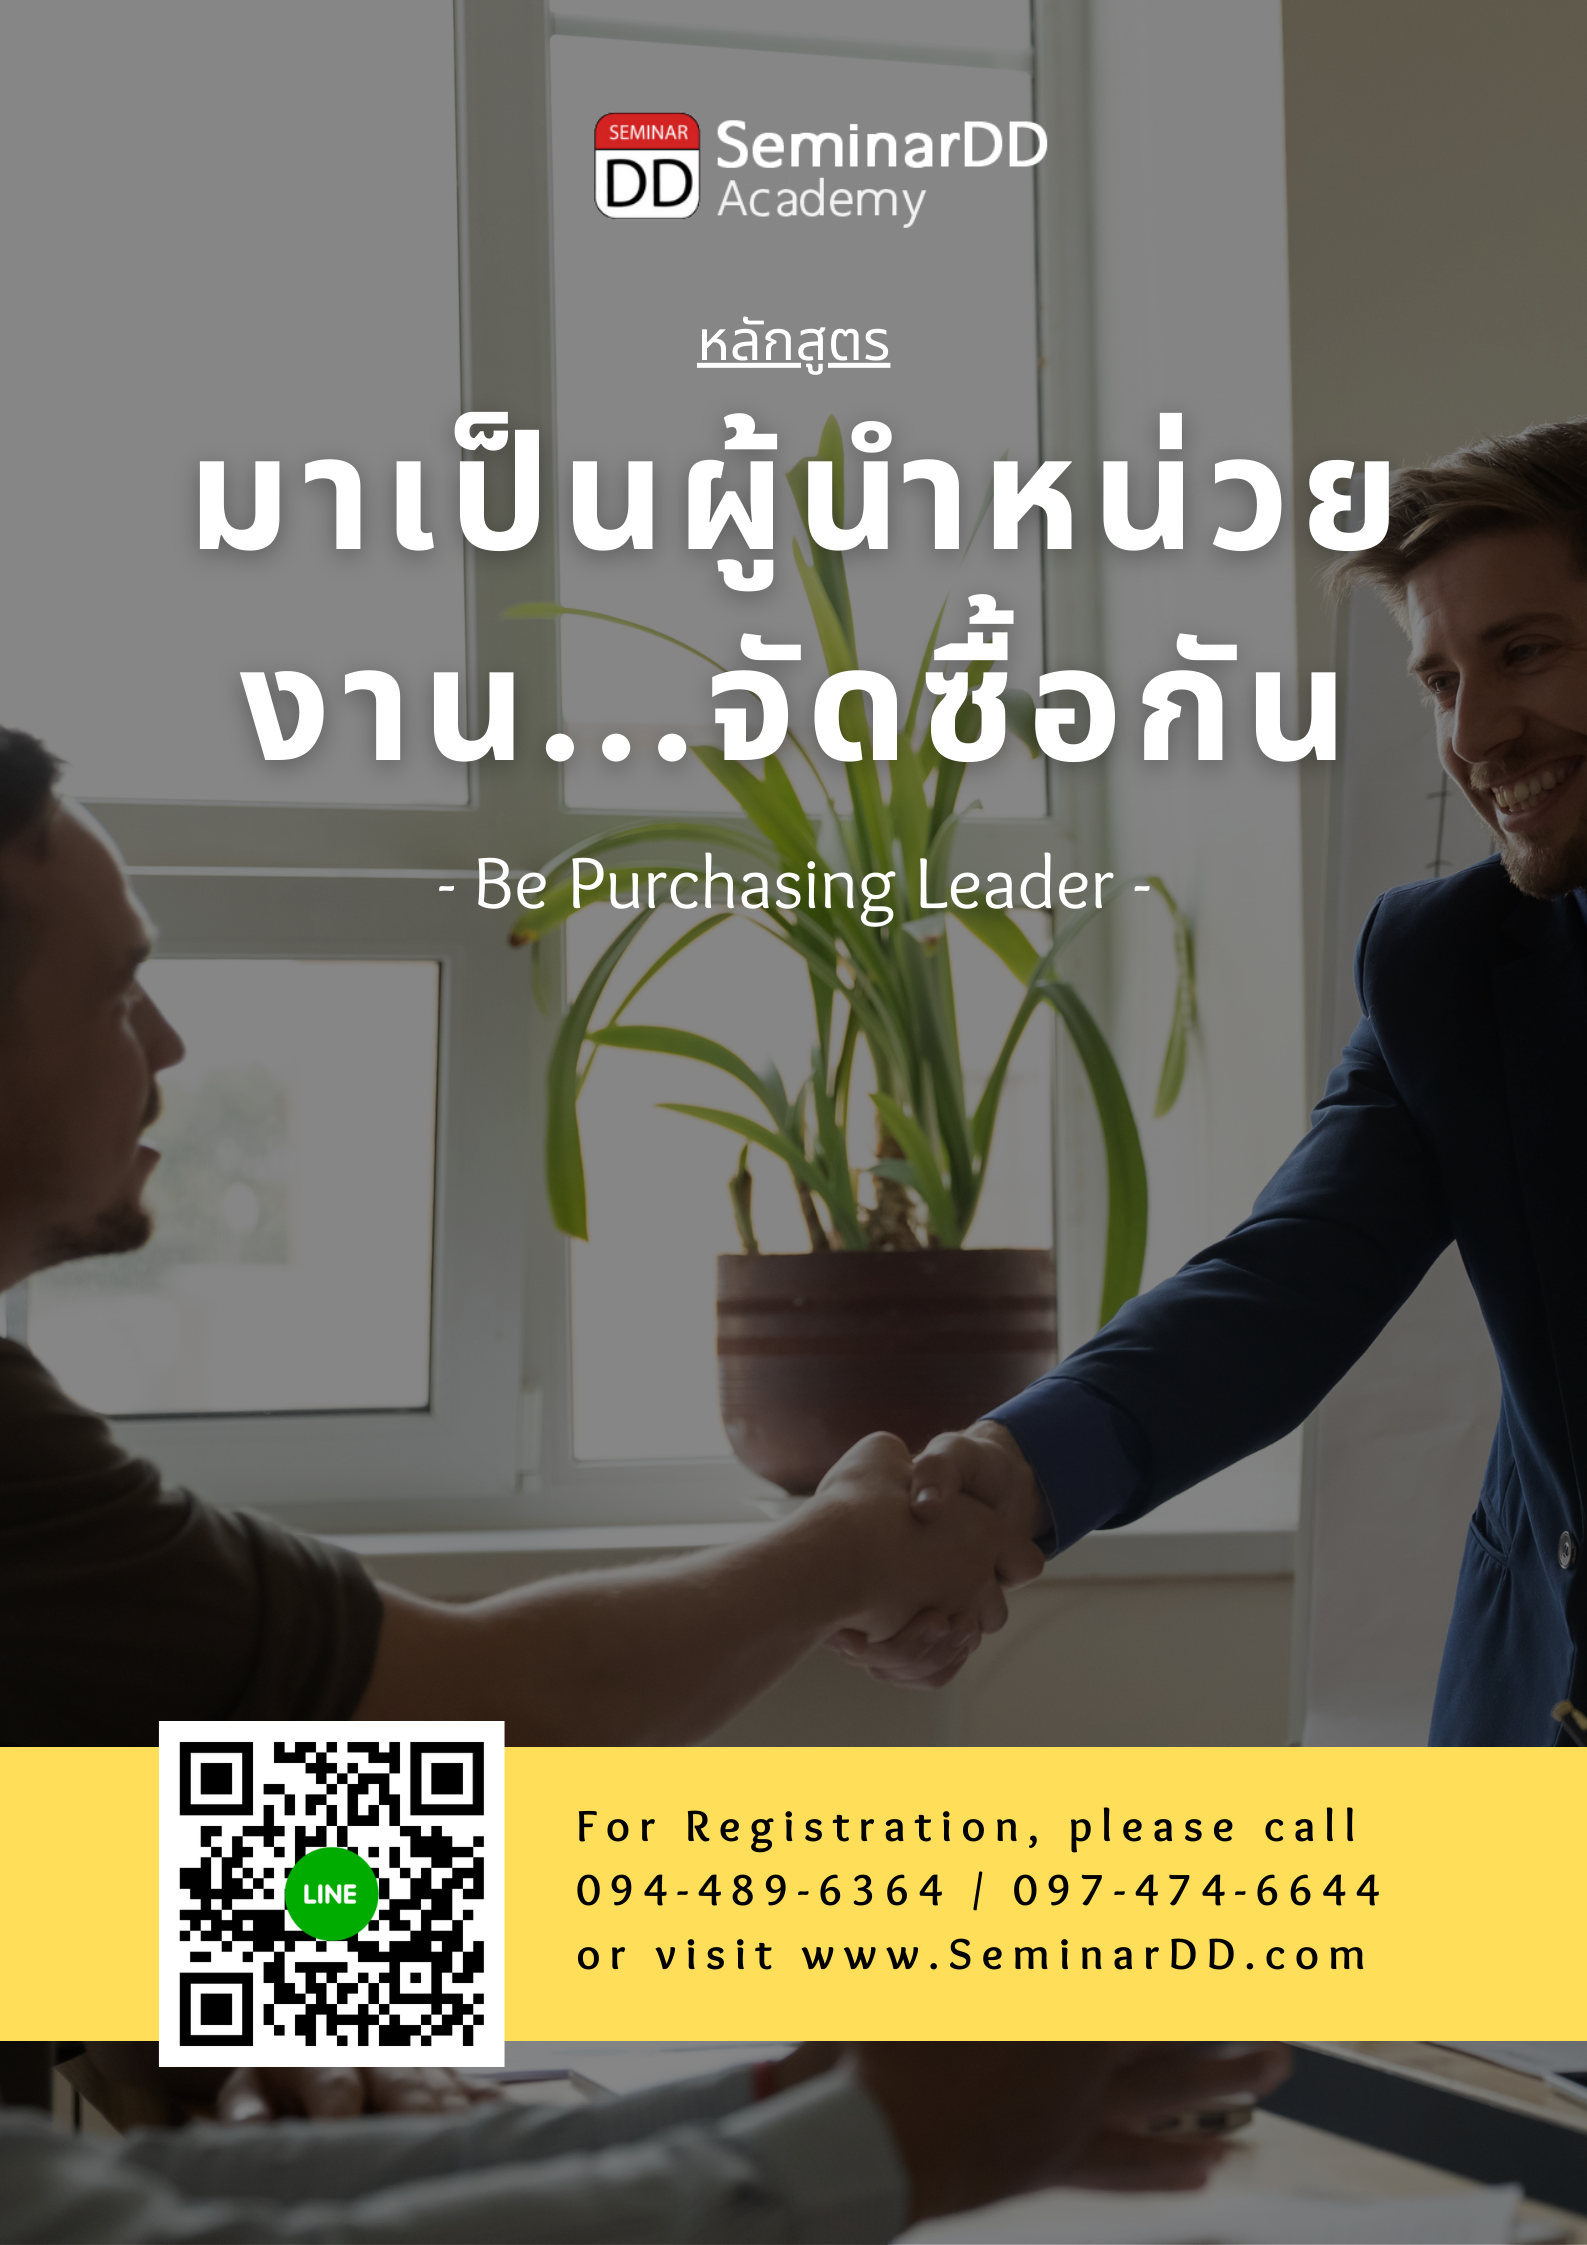 Online by Zoom หลักสูตร หลักสูตร มาเป็นผู้นำหน่วยงาน..จัดซื้อกัน  (Be Purchasing Leader)